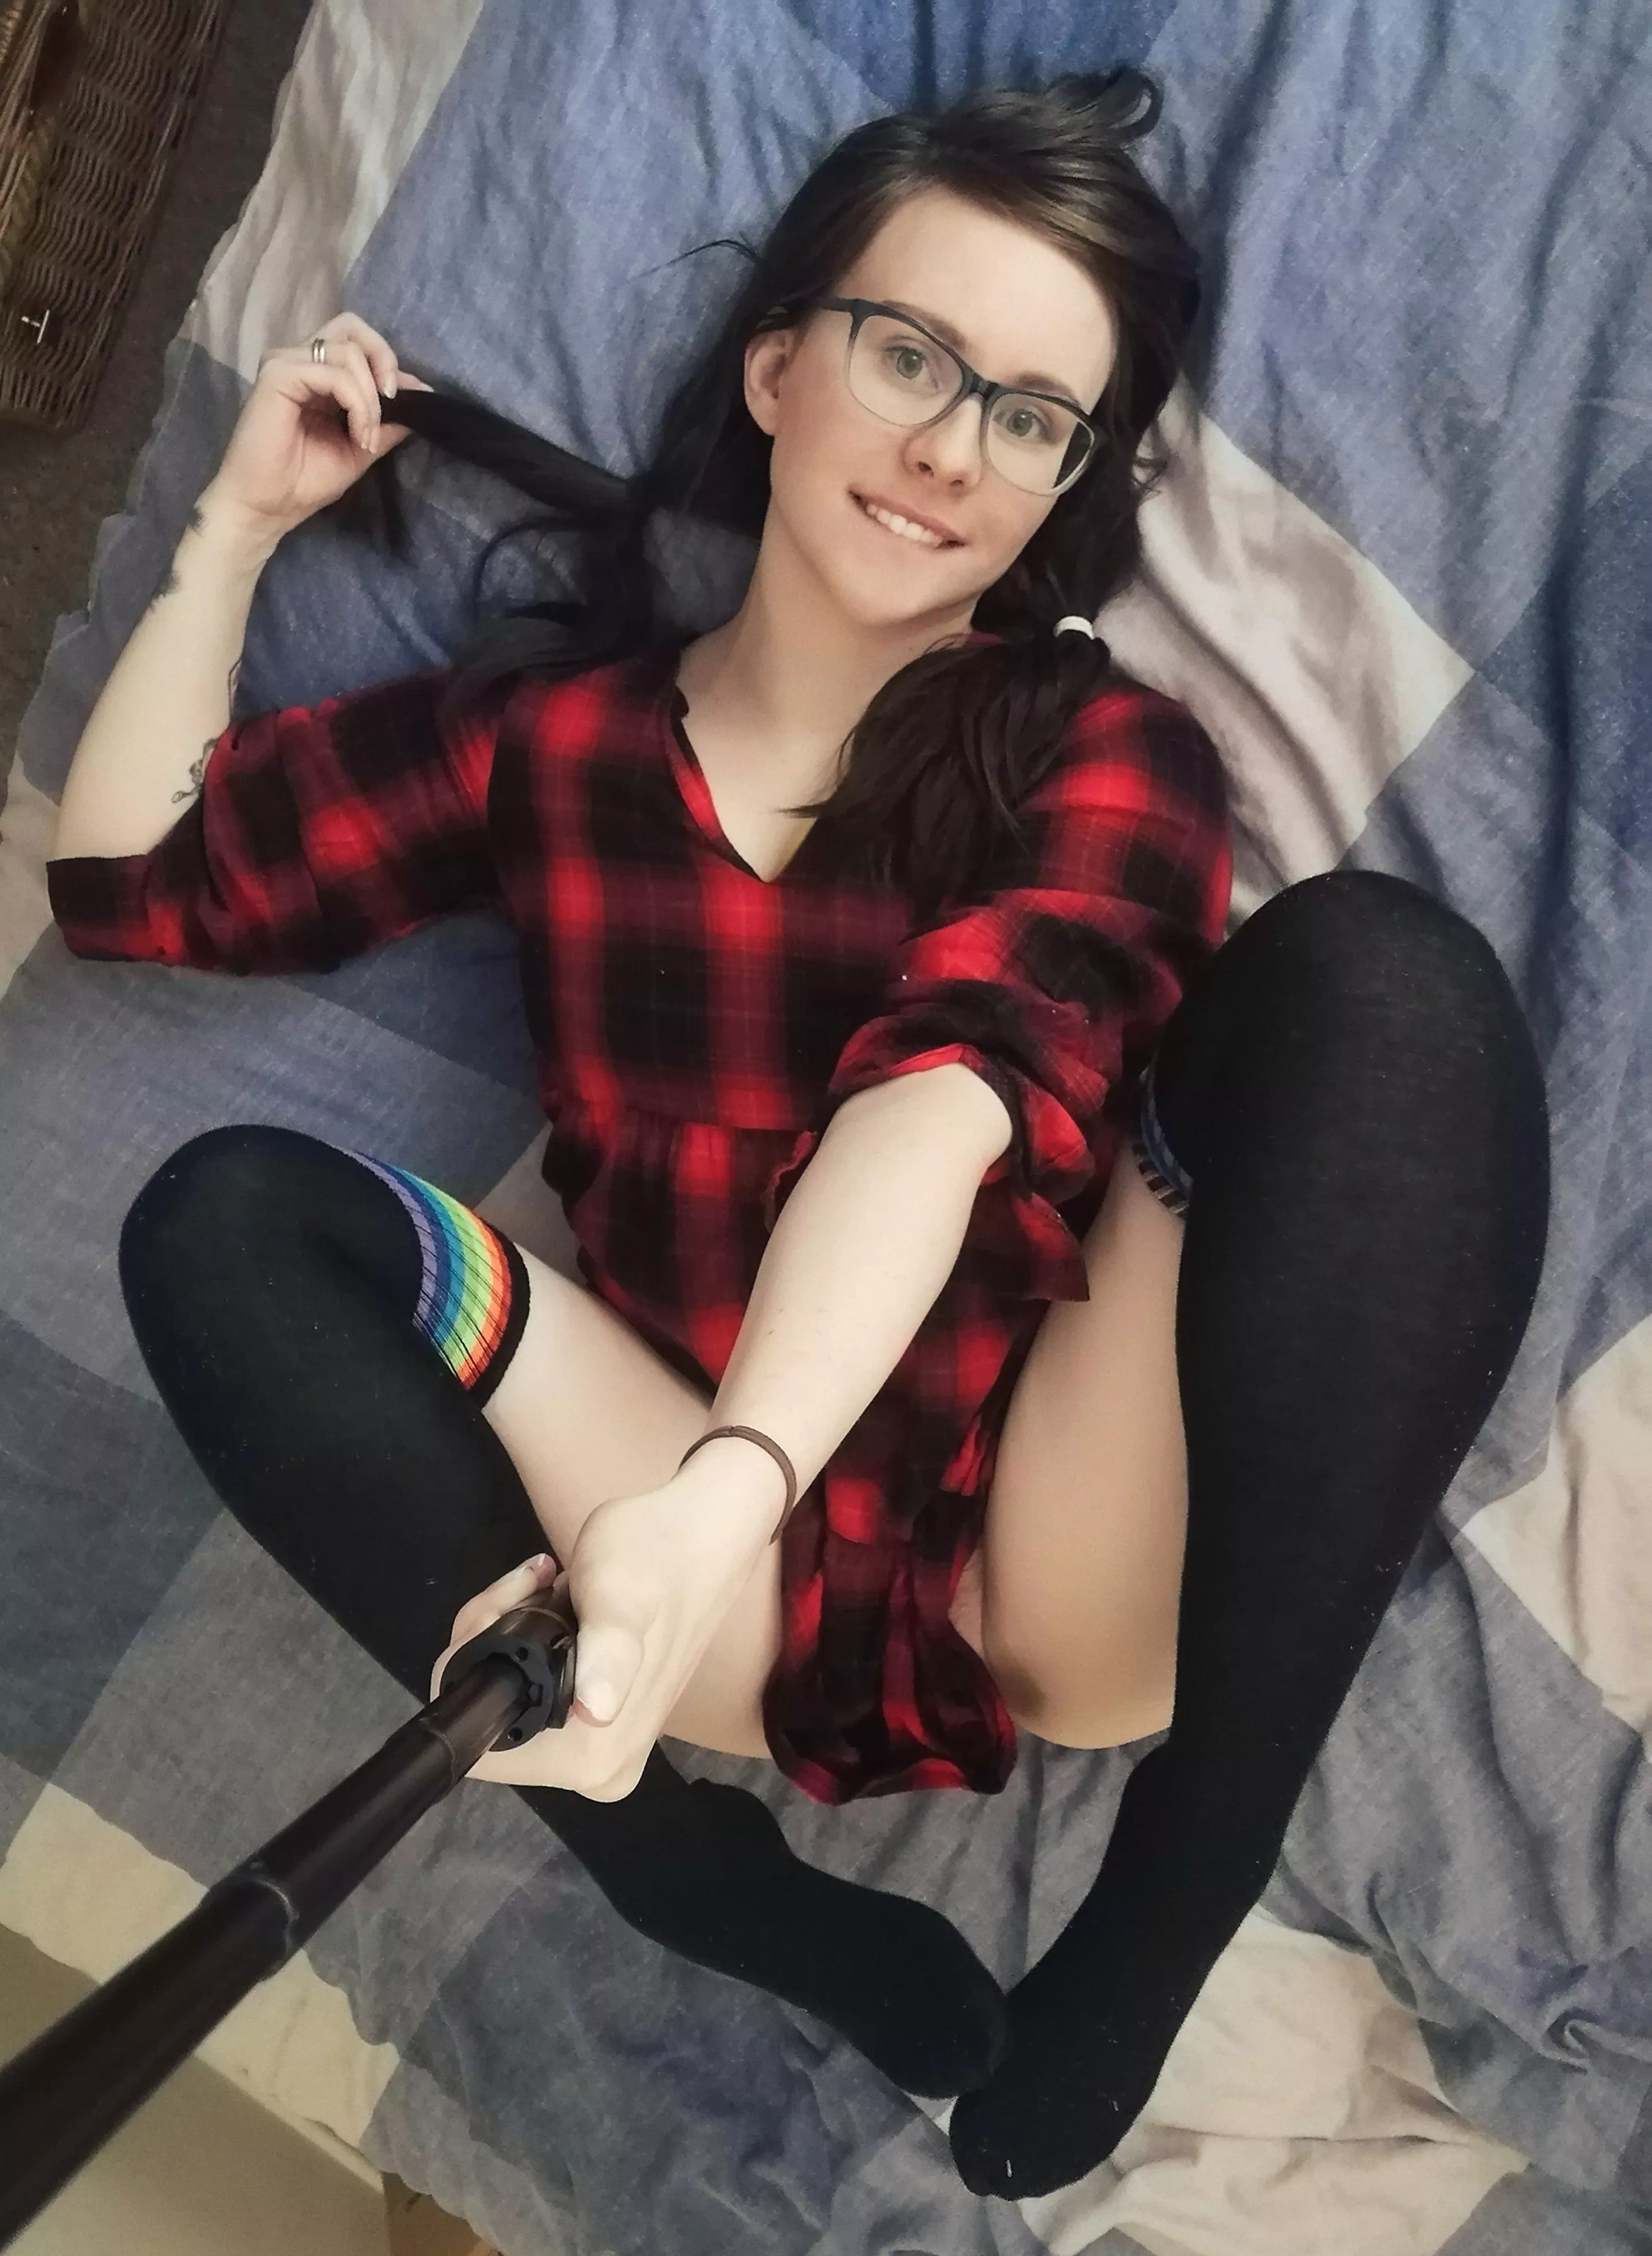 Hot nerdy girl with glasses fucks her bf in various positions